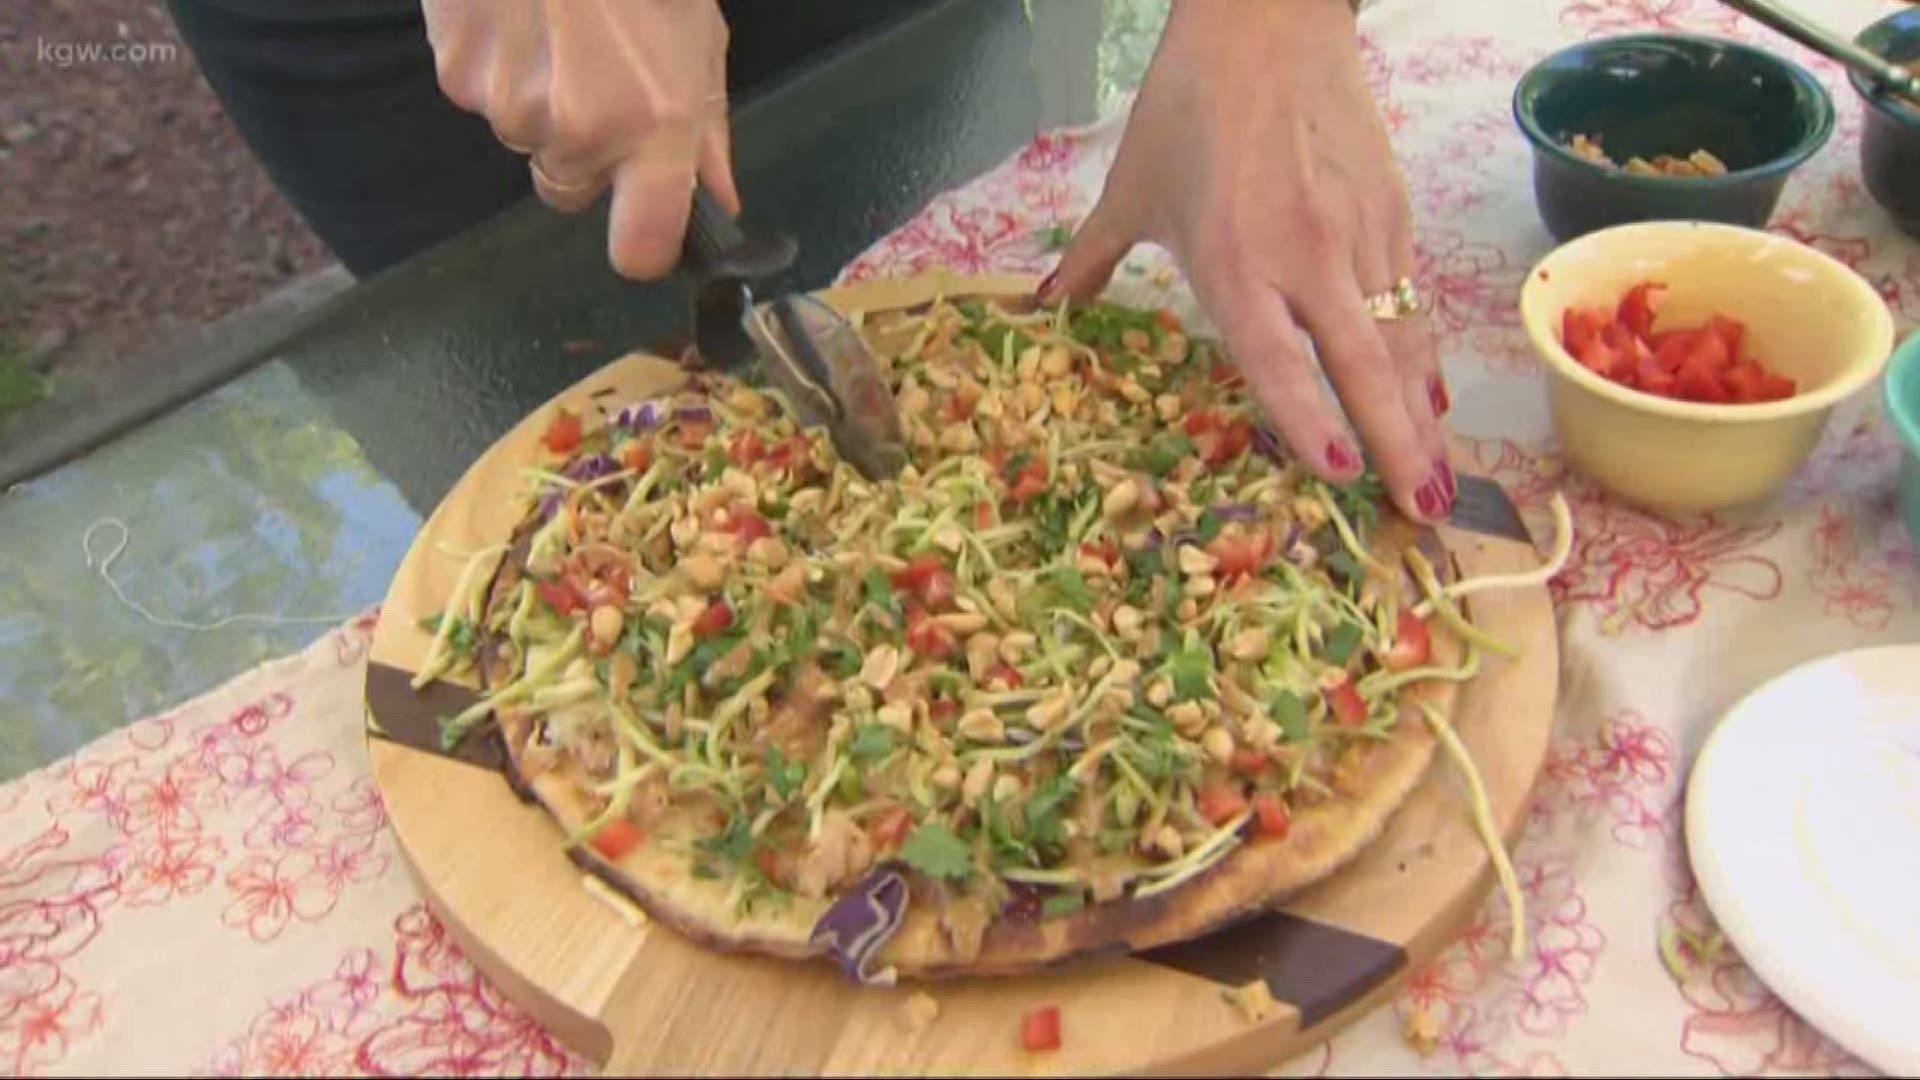 Loyal KGW viewers Pam & Paul Anderson from Gladstone share their recipe for Thai pizza baked on an outside grill.